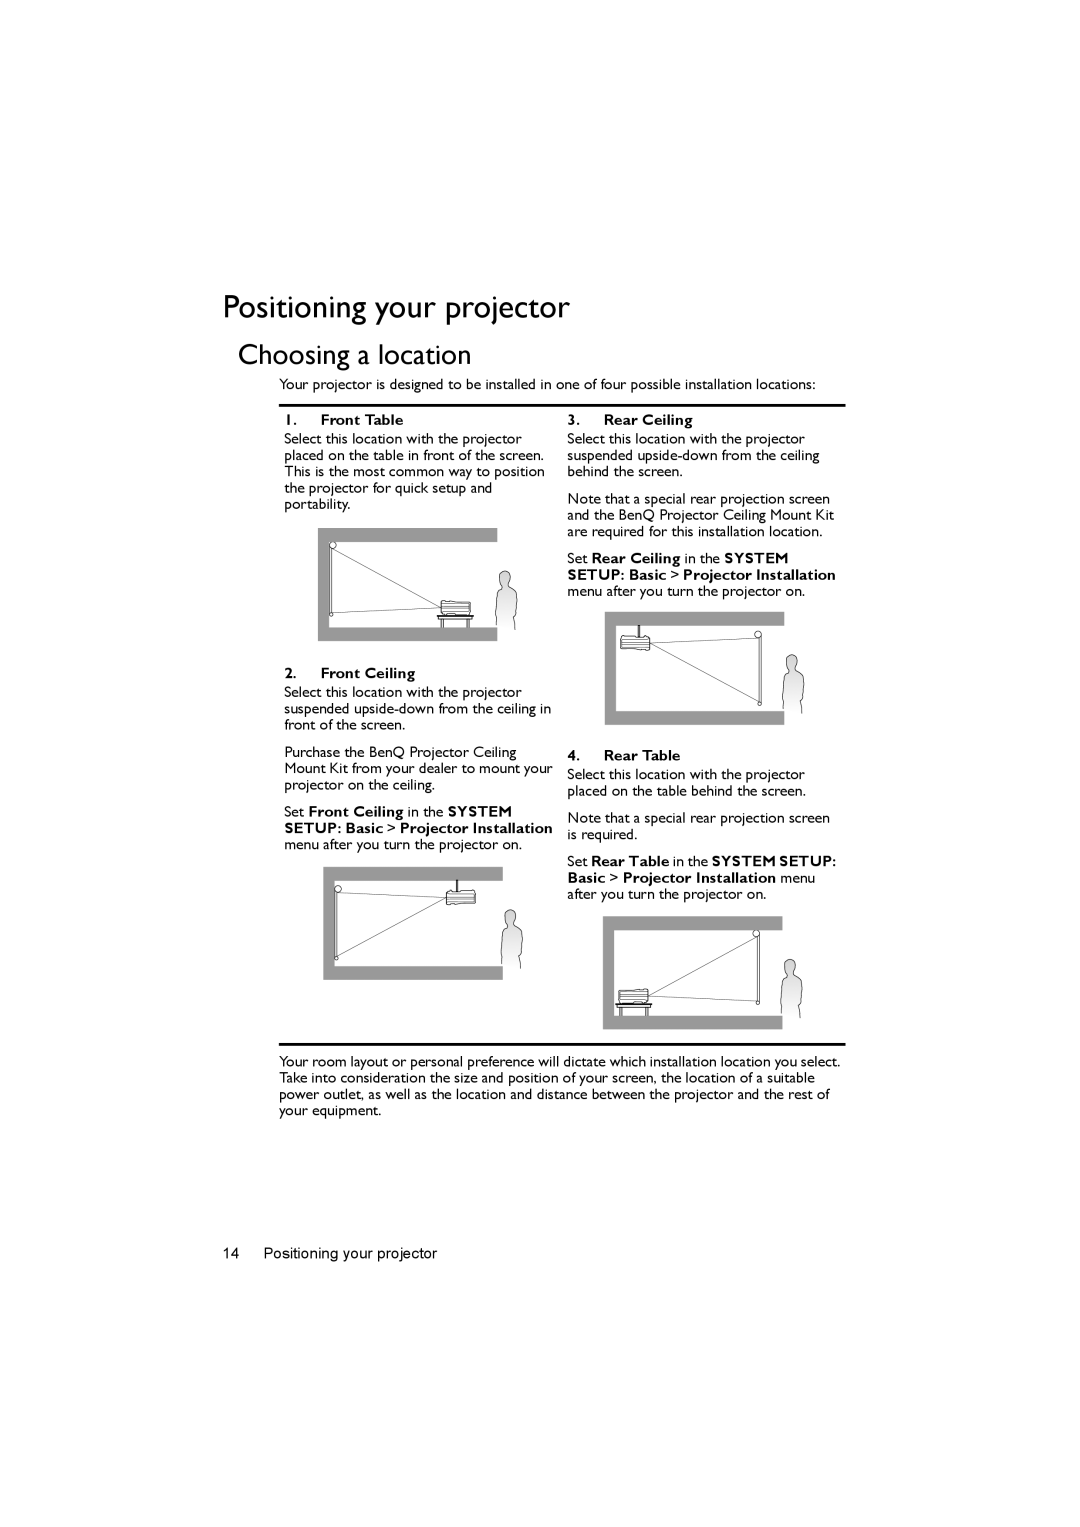 BenQ MX722 user manual Positioning your projector, Choosing a location, Front Table, Front Ceiling 